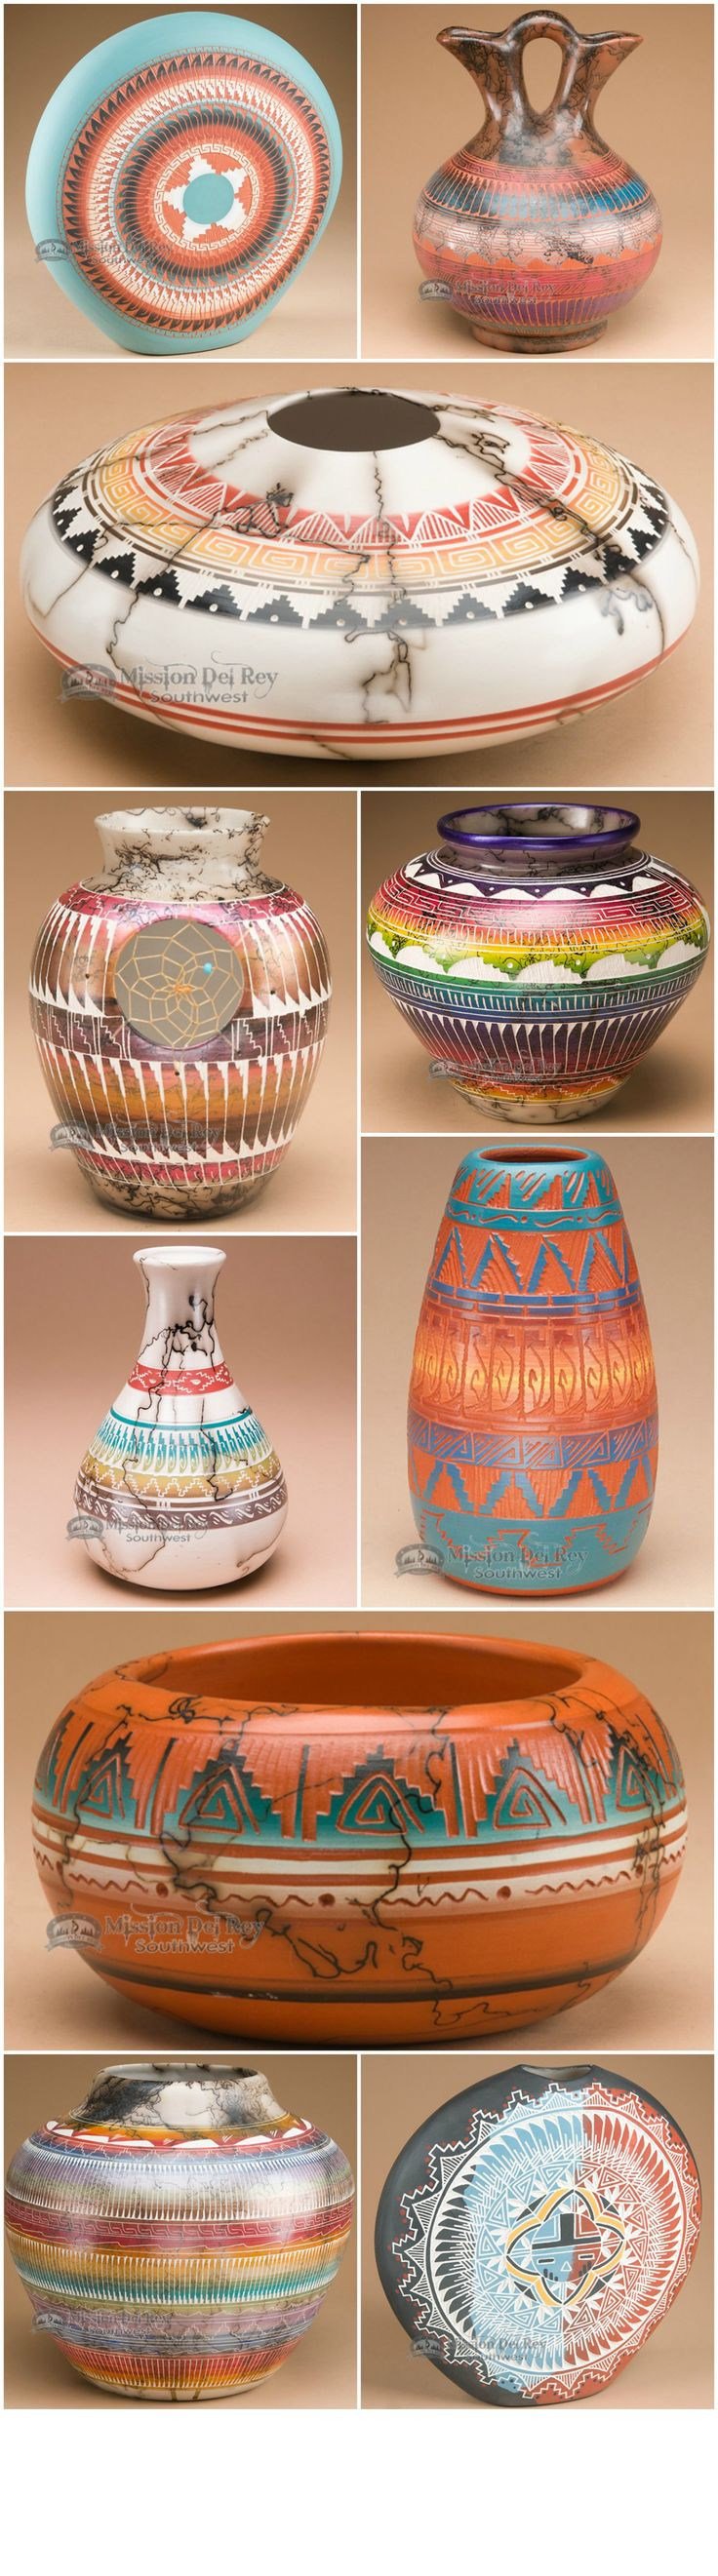 24 attractive Navajo Pottery Vases 2024 free download navajo pottery vases of 702 best for the love of pottery clay images on pinterest inside find beautiful pieces of native american pottery at http www missiondelrey